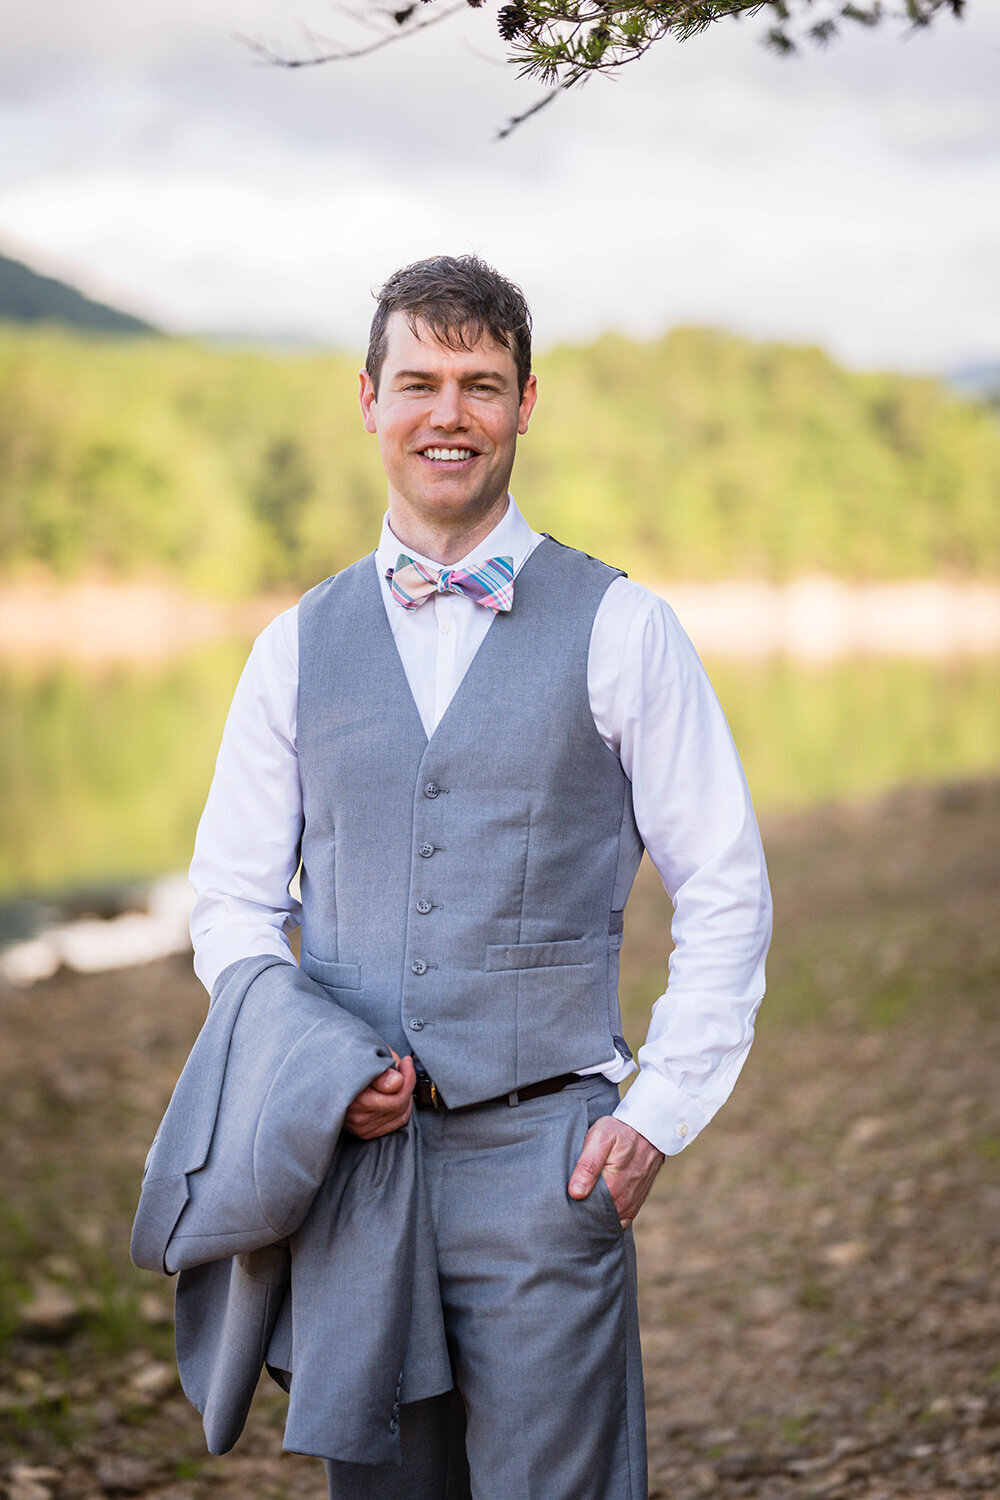 A groom stands along the shores of Carvin’s Cove for a formal portrait on his elopement day. He stands with one of his hands in his pocket and with his suit jacket draped over his other arm. He smiles and is wearing a plain white button up shirt, a pink and blue plaid bowtie, and gray vest and pants.